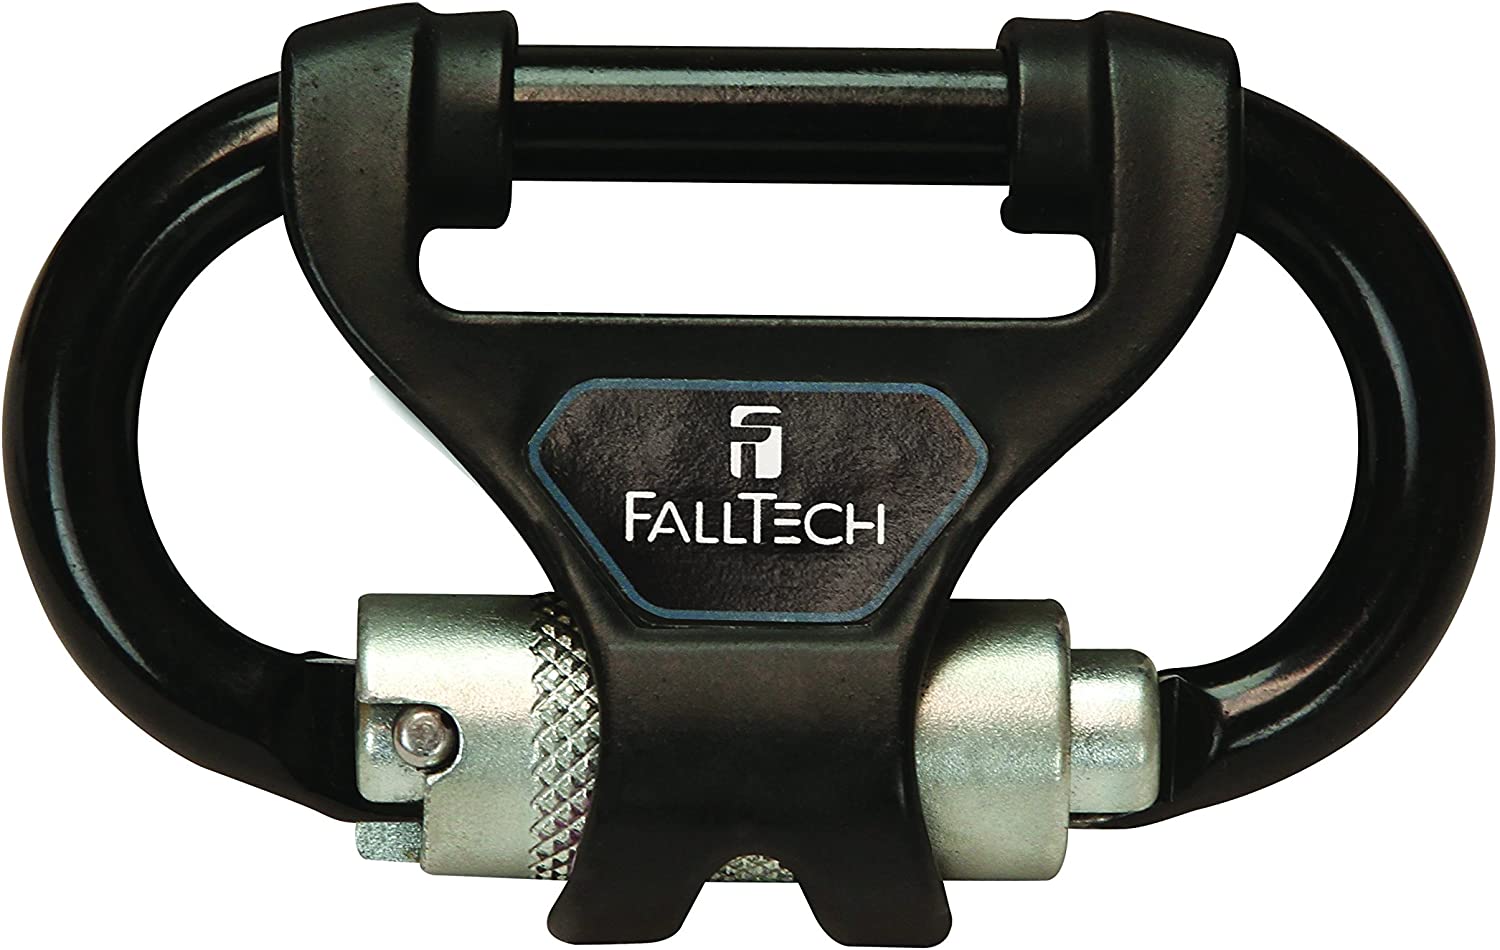 FallTech 5071 Alloy Steel Carabiner with Alignment Clip for Personal Twin SRLs